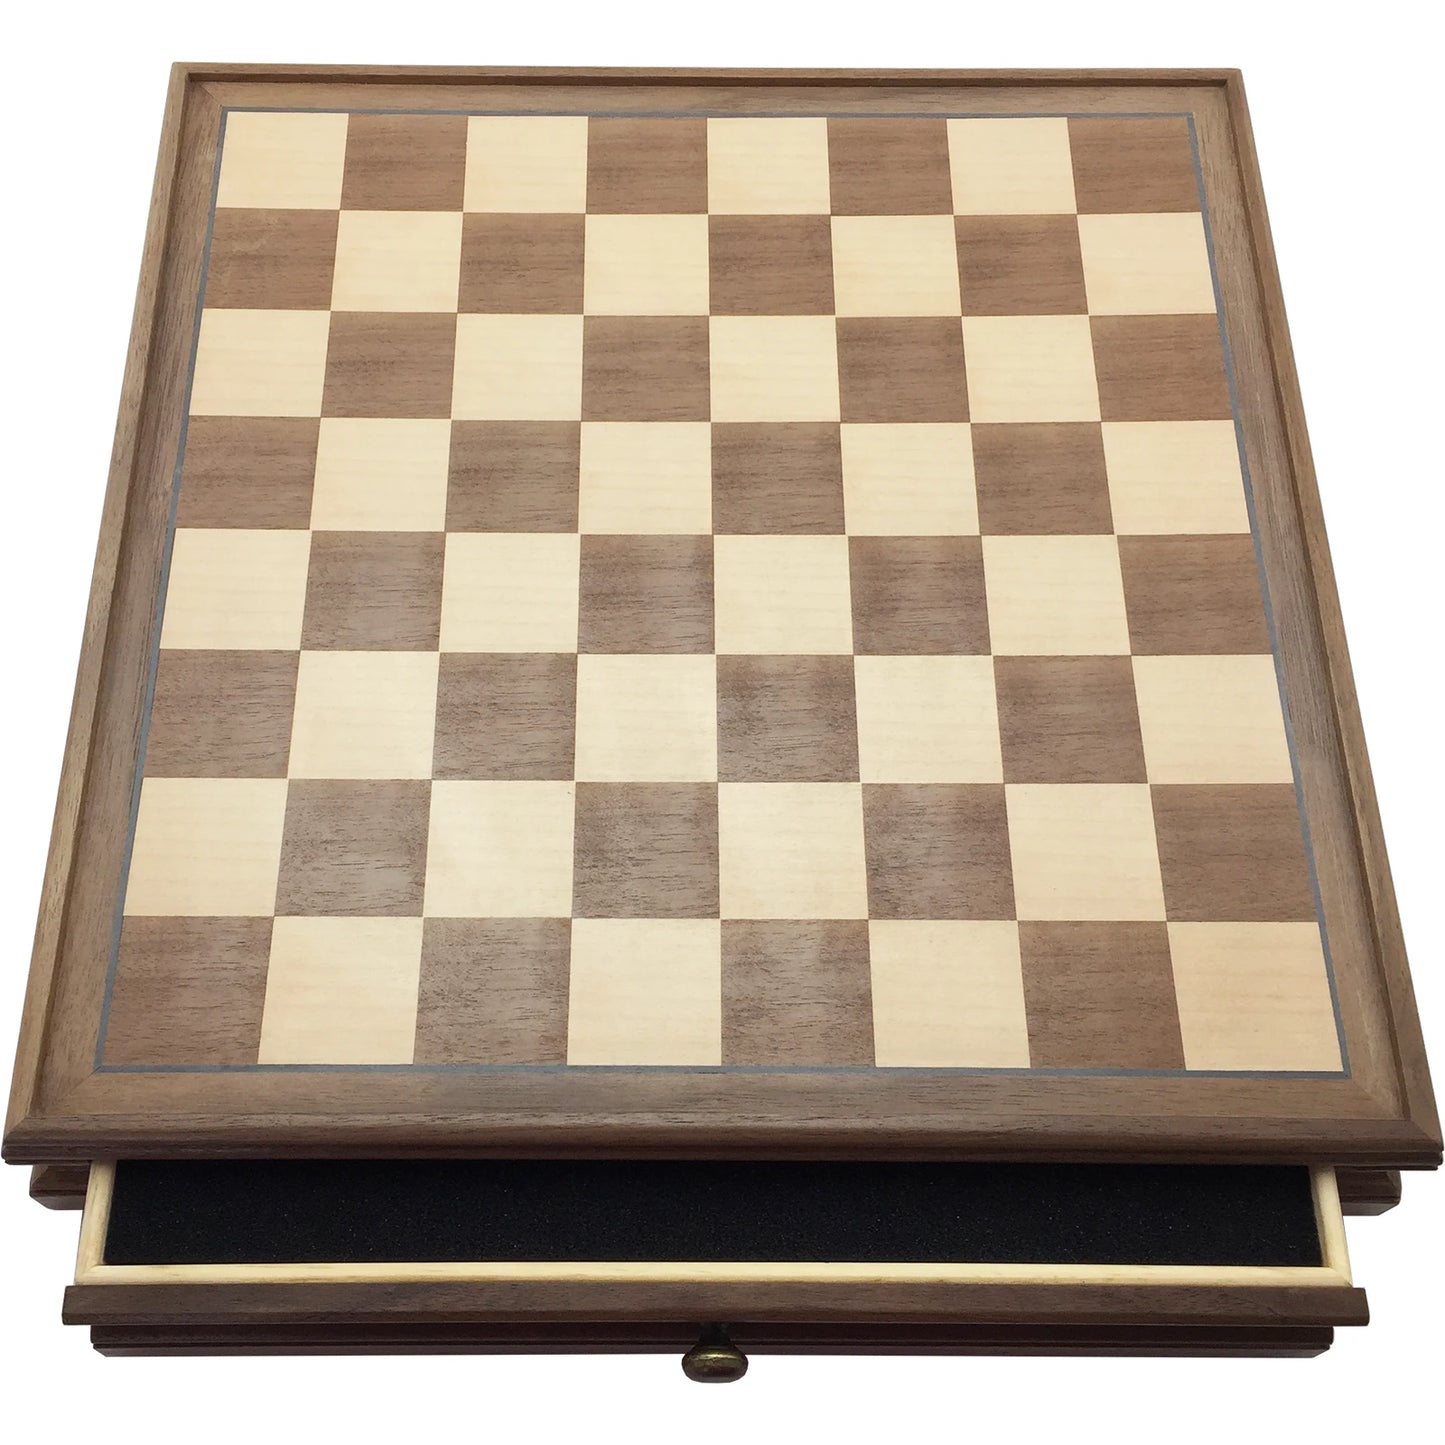 Wood chess board with drawer open.